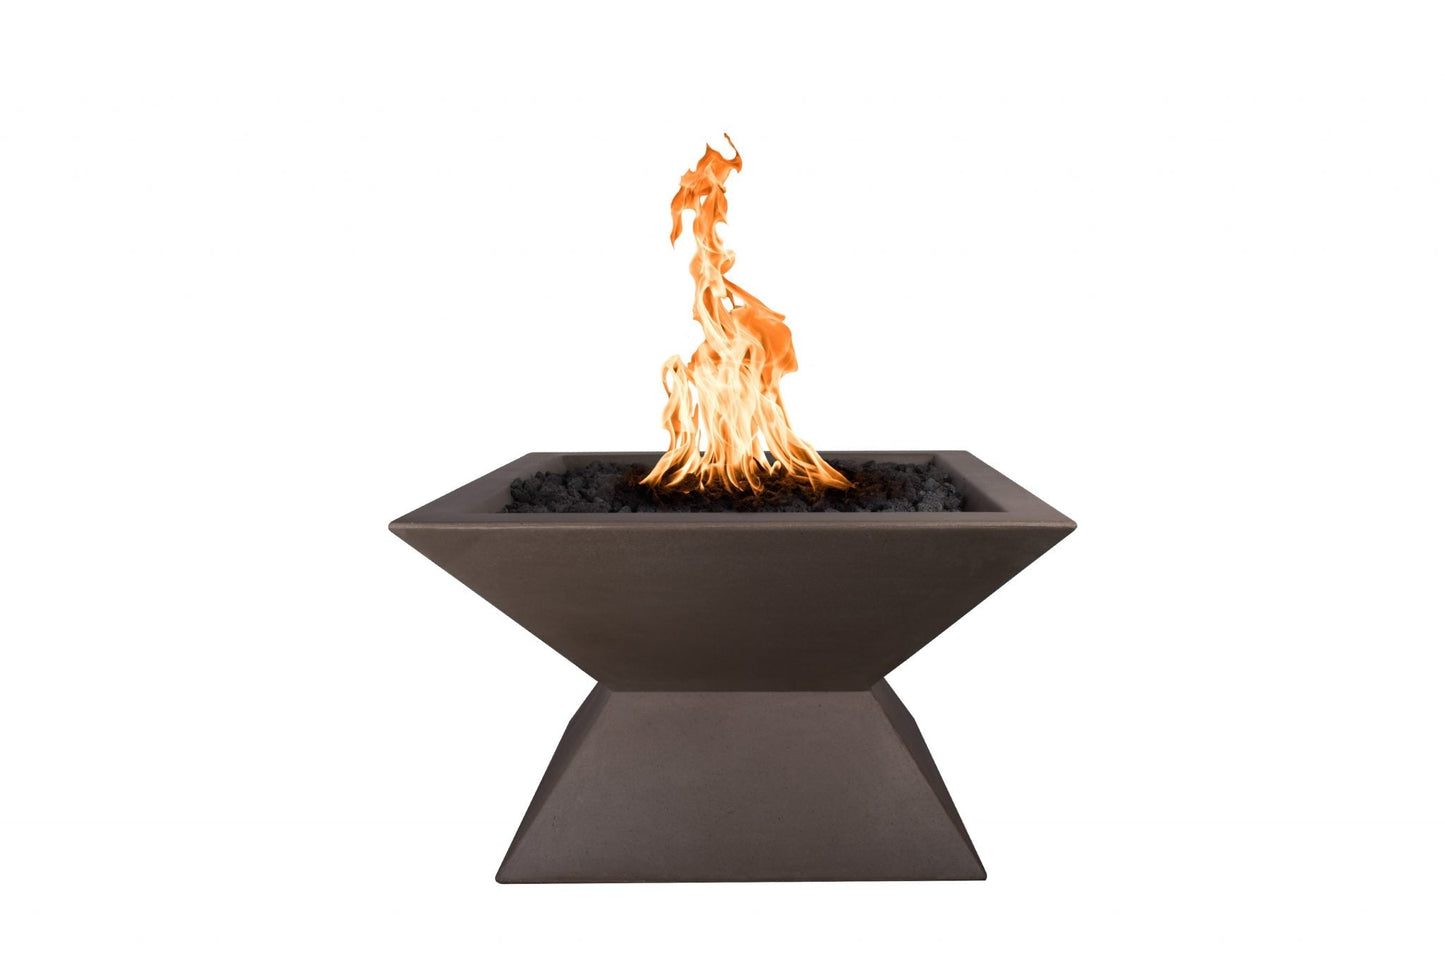 The Outdoor Plus Square Uxmal 30" Chocolate GFRC Concrete Liquid Propane Fire Pit with Match Lit with Flame Sense Ignition